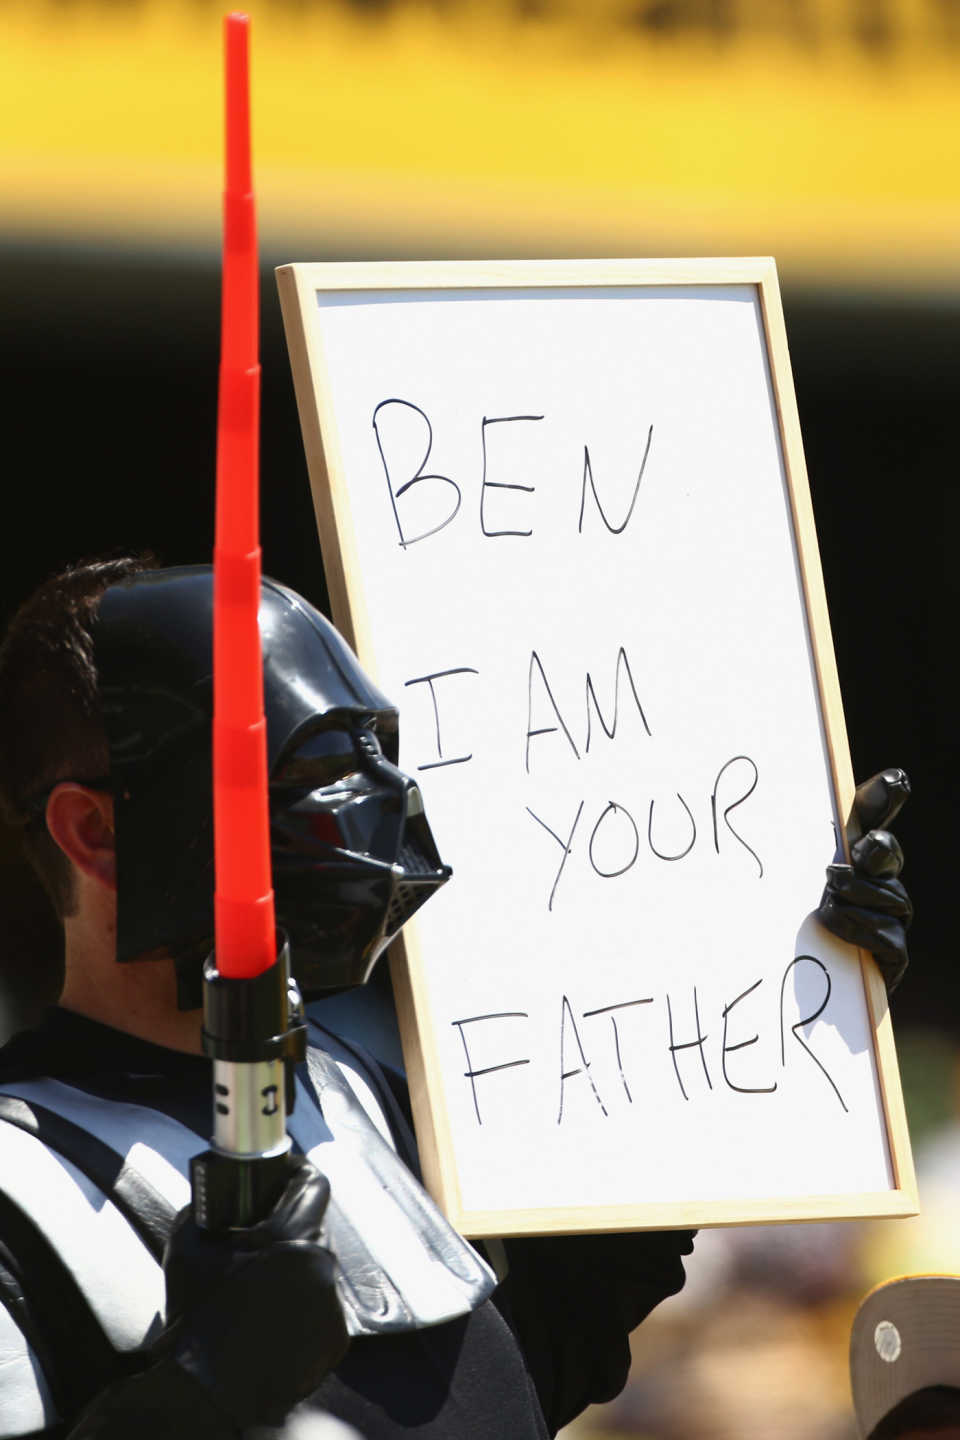 Darth Vader holds up a sign for Ben Cutting